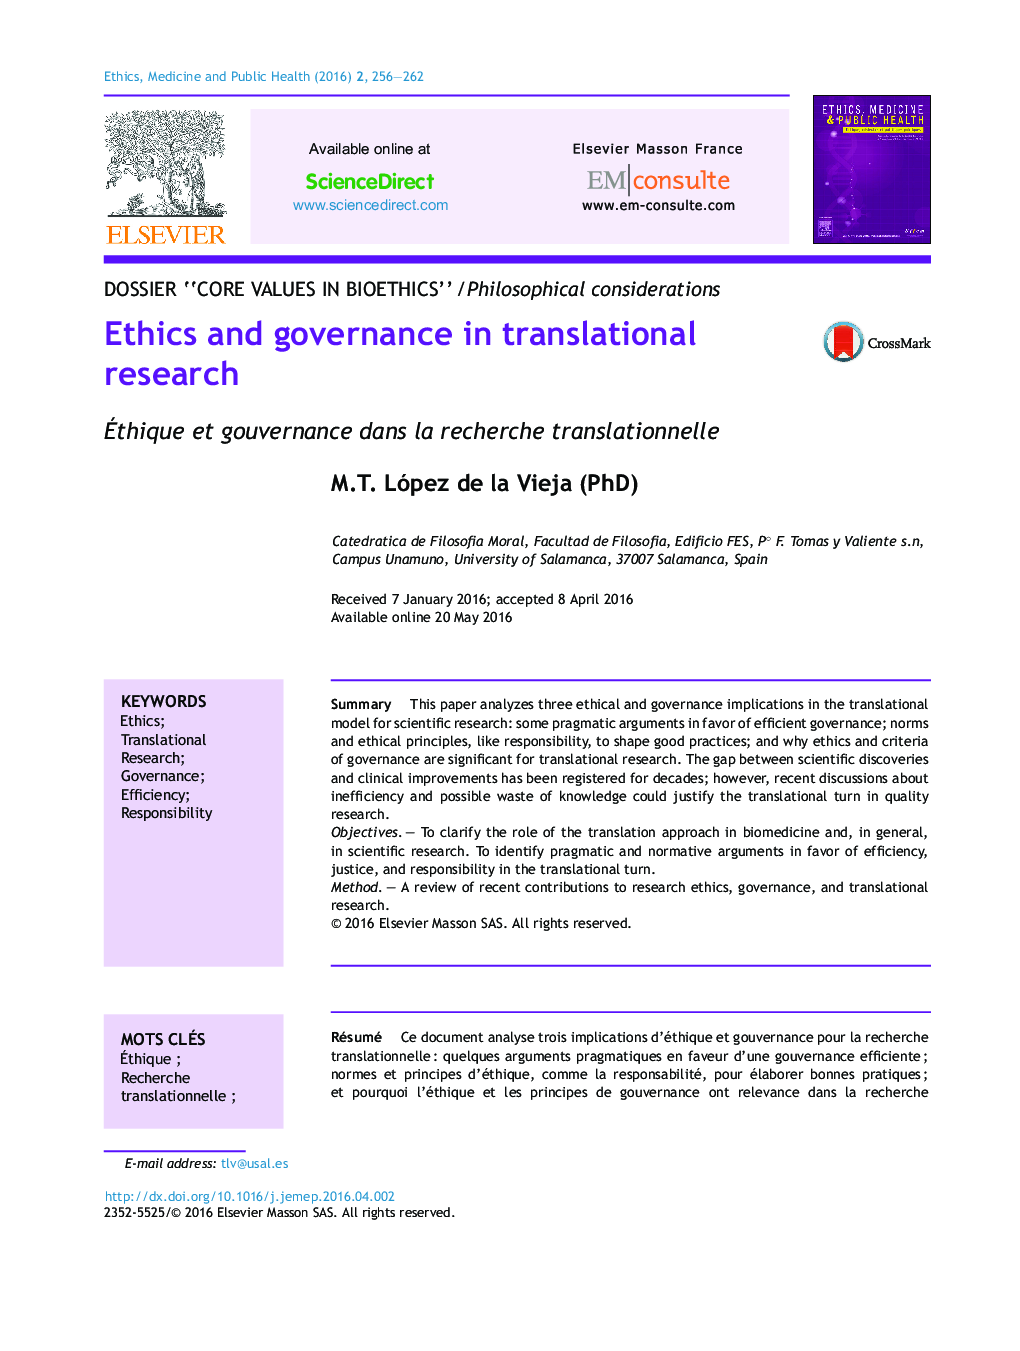 Ethics and governance in translational research